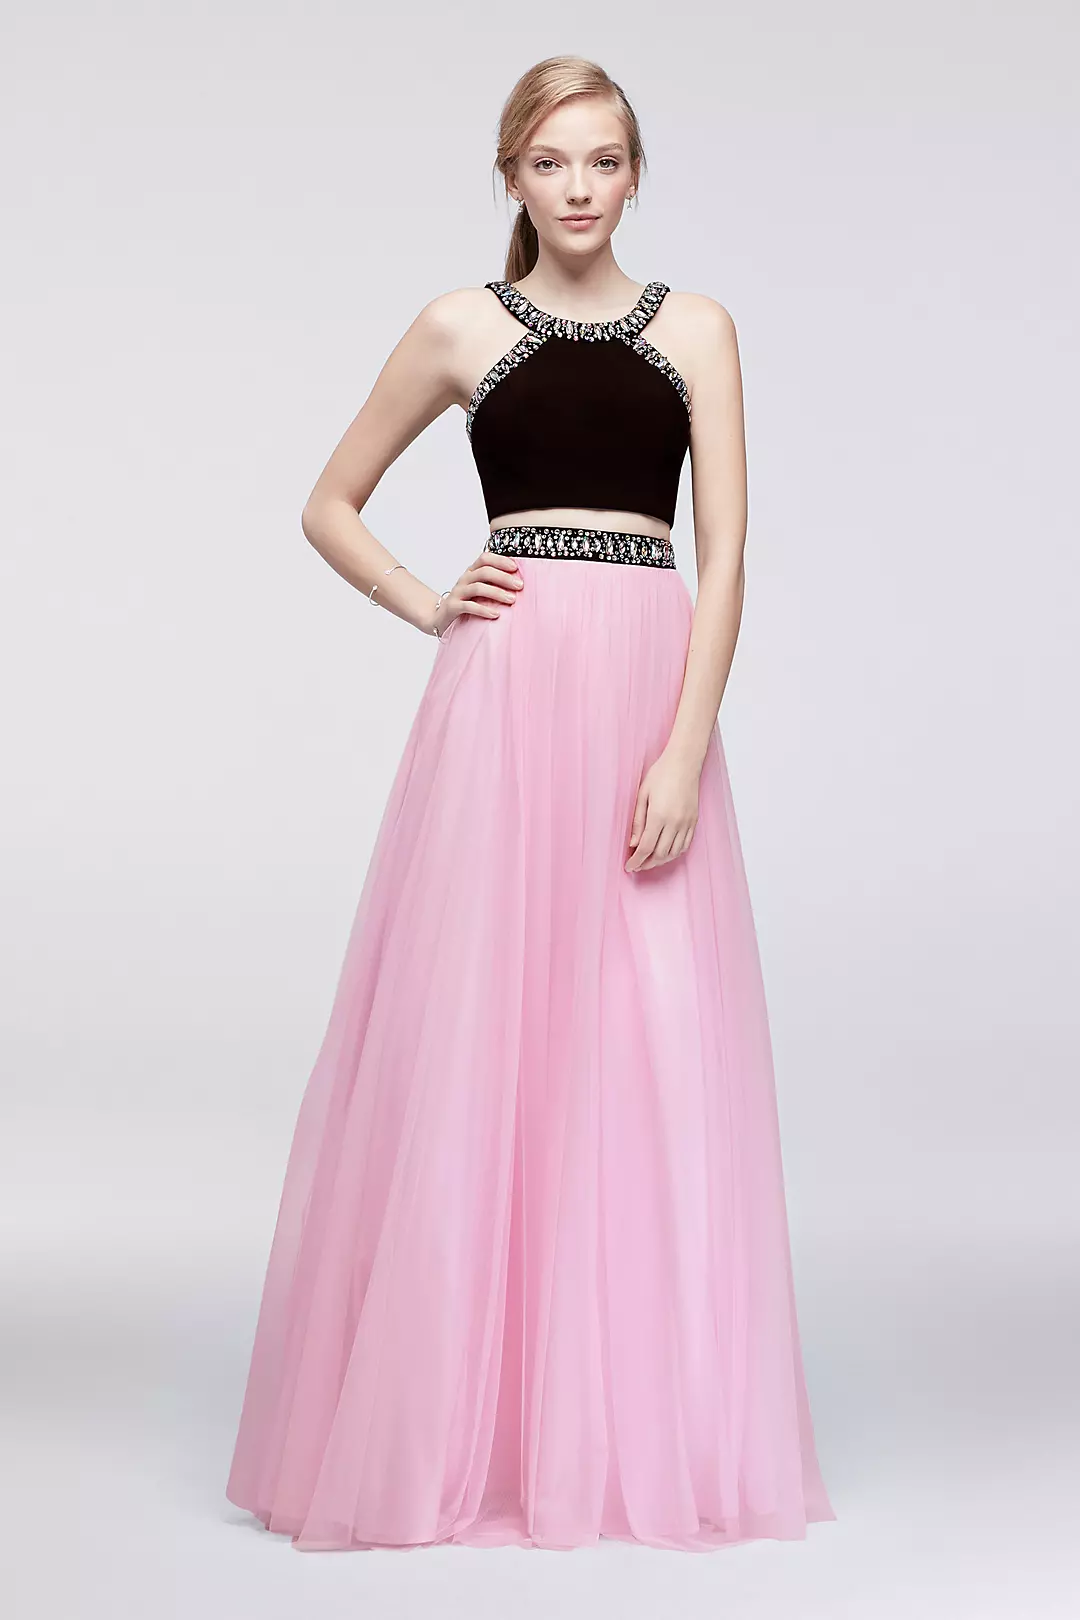 Two-Piece Jersey Halter Dress with Beading Image